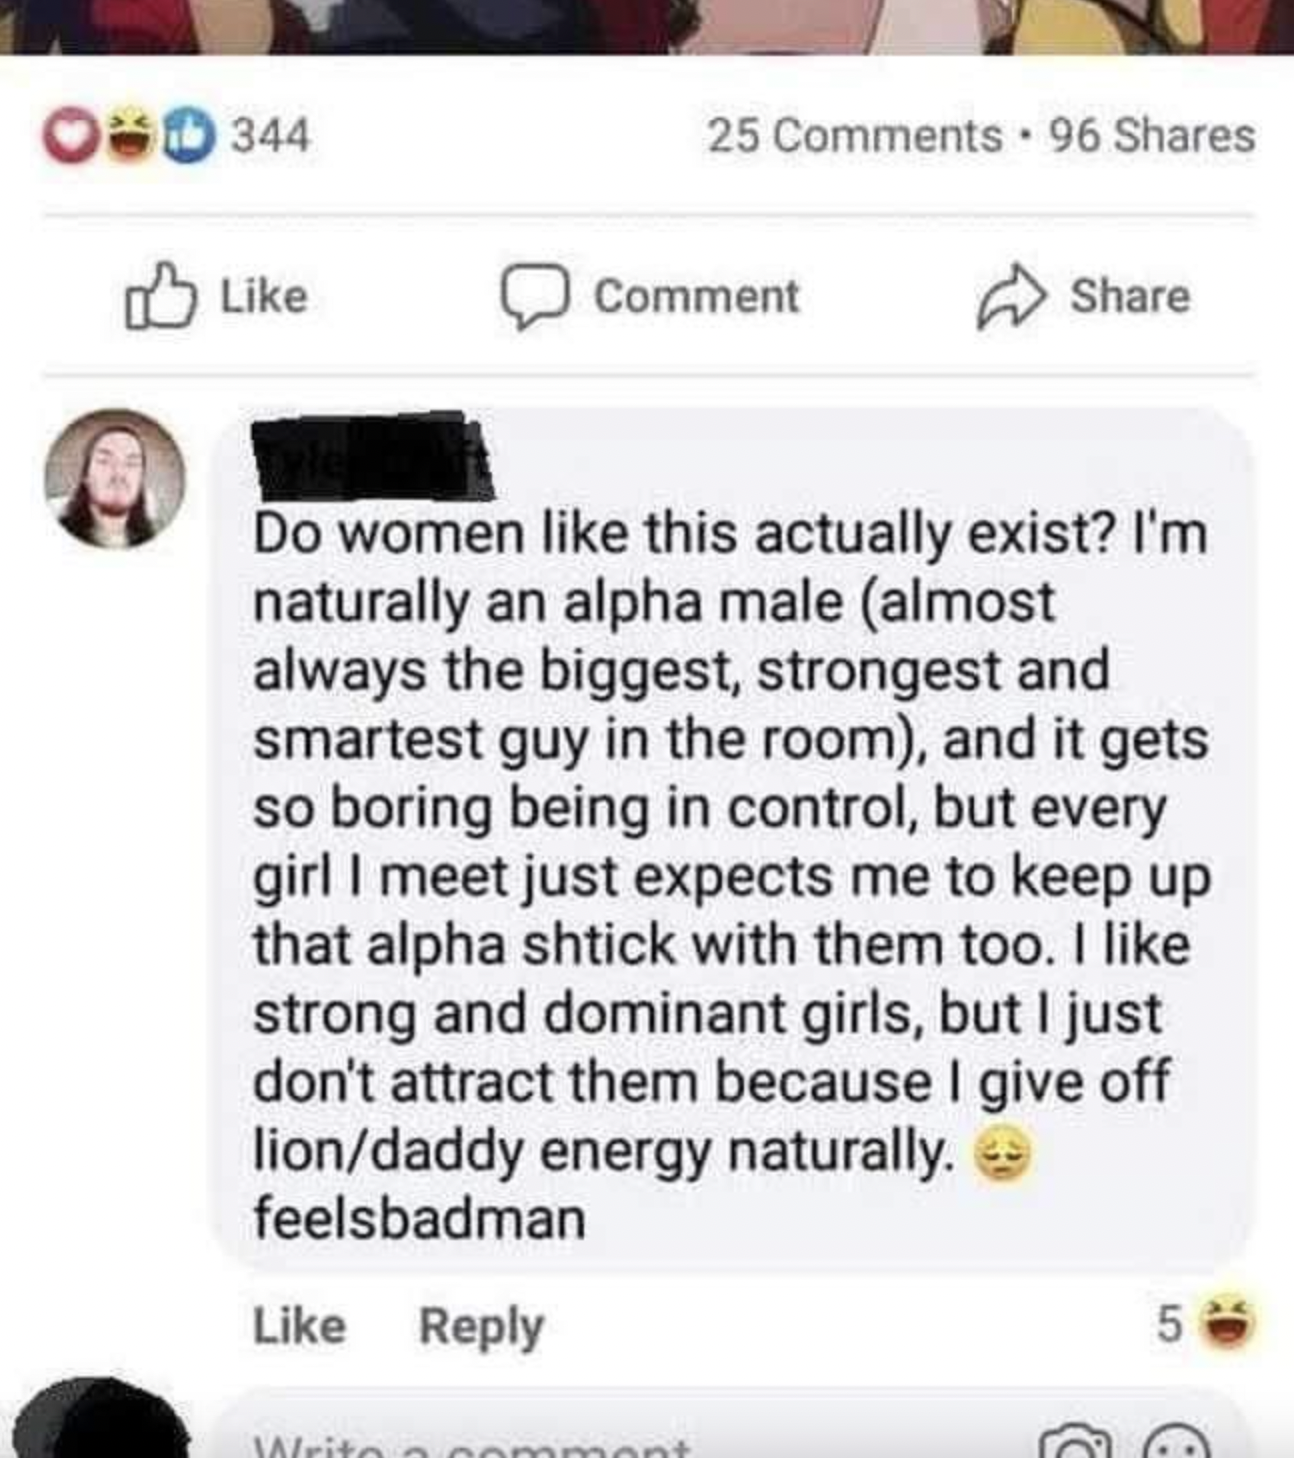 Funny Facepalms and Fails - Comment Do women this actually exist? I'm naturally an alpha male almost always the biggest, strongest and smartest guy in the room, and it gets so boring being in control, but every girl I meet just expects me to keep